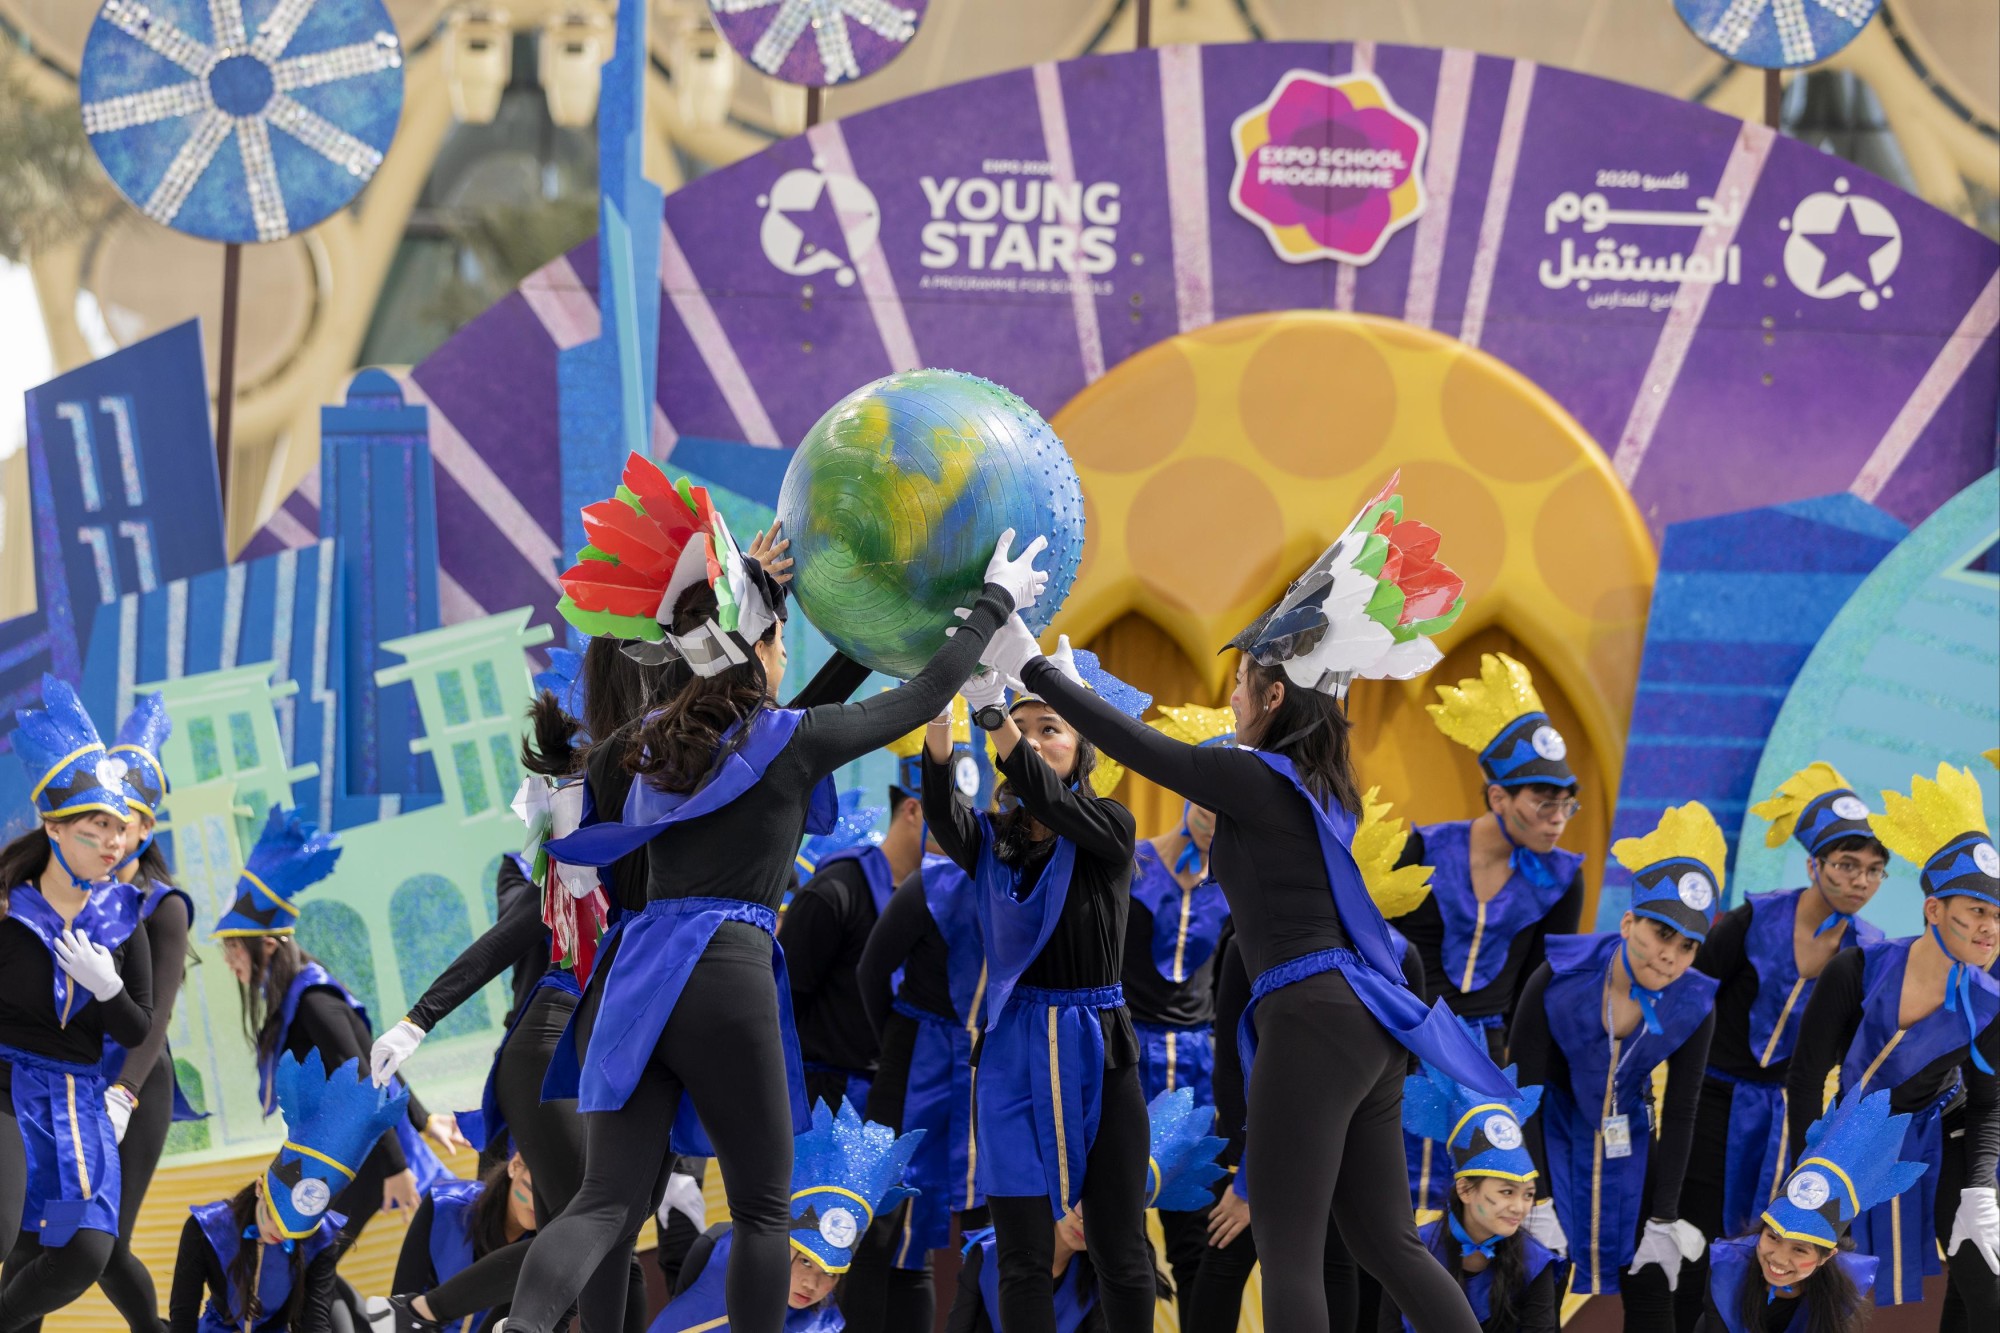 Far Eastern Private School, Halwan Campus, Sharjah perform during Expo Young Stars on Al Wasl Stage m56702